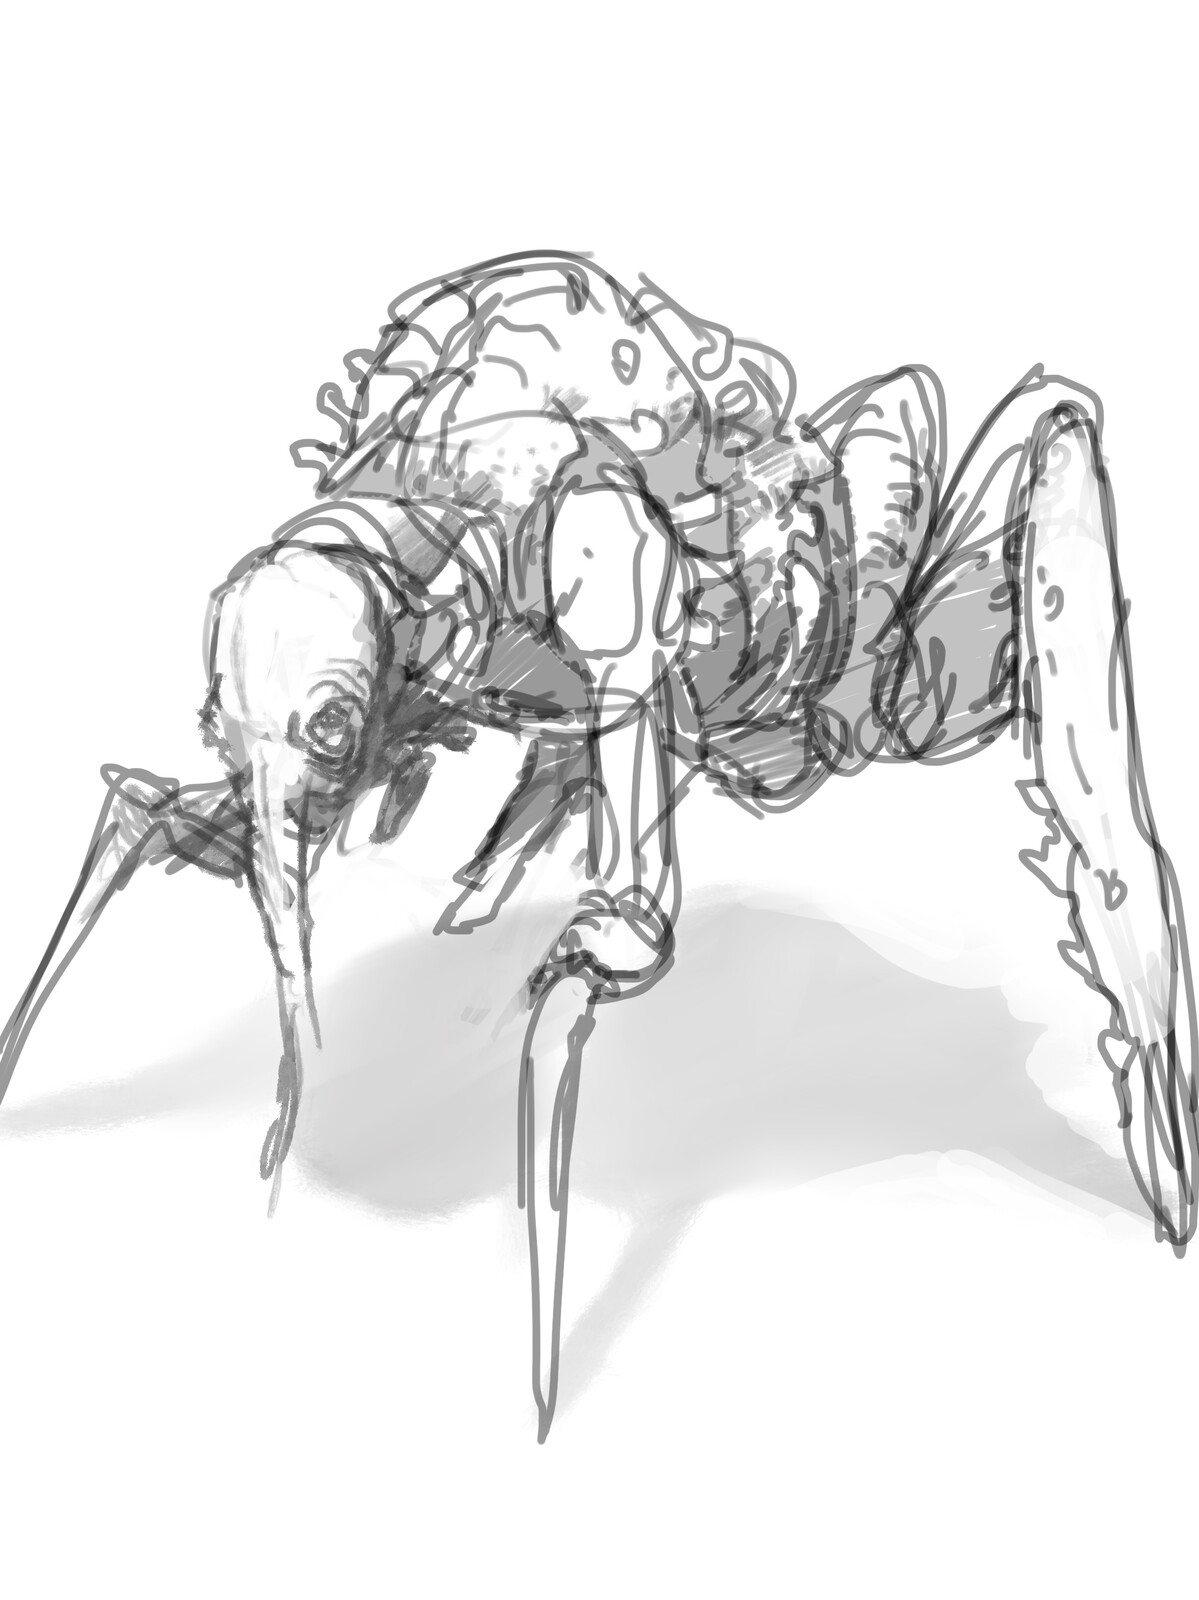 Yet another crawly thing.